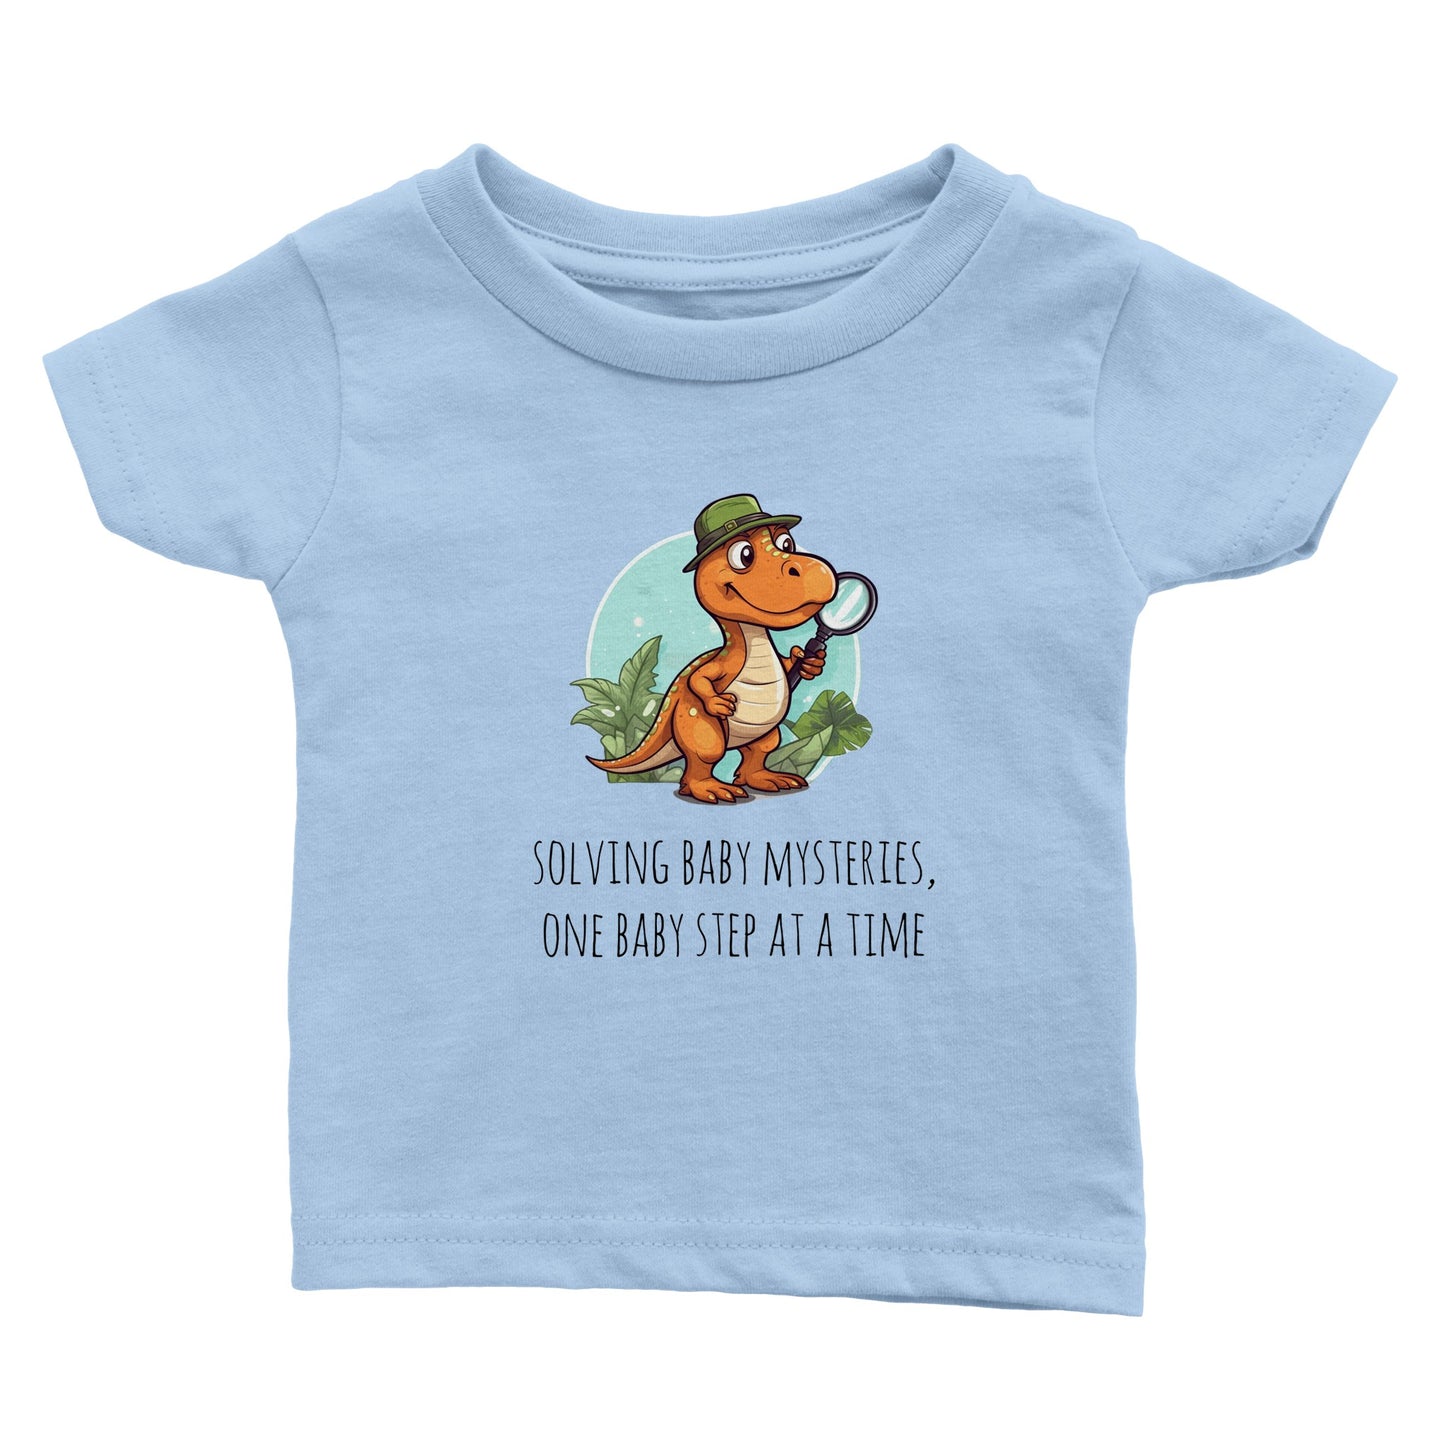 Classic Baby Crewneck T-shirt - Solving Baby Mysteries, One Baby Step At A Time